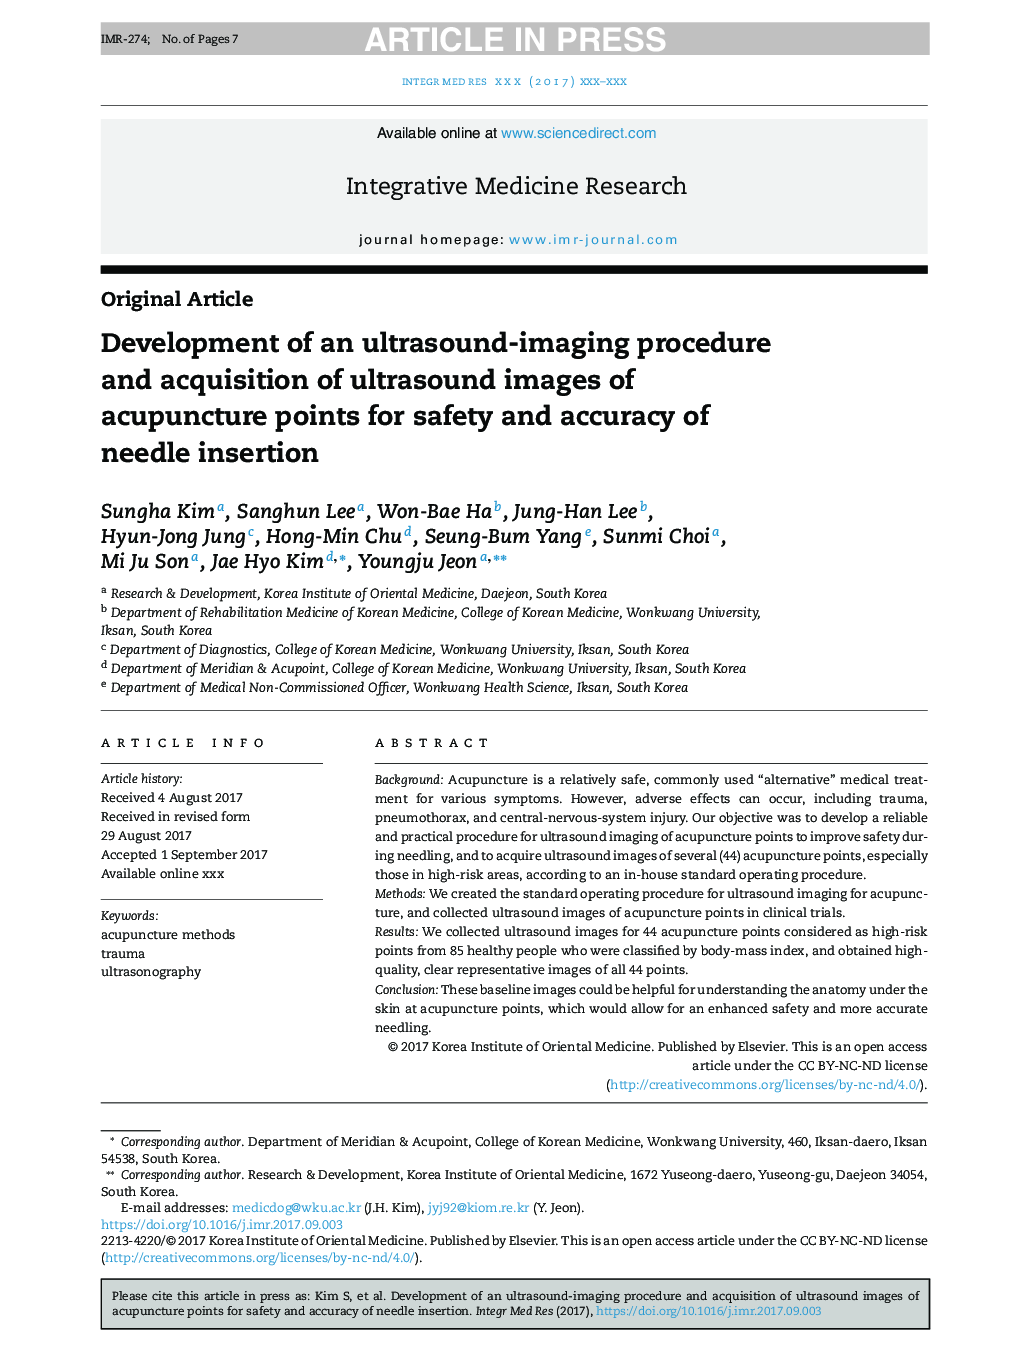 Development of an ultrasound-imaging procedure and acquisition of ultrasound images of acupuncture points for safety and accuracy of needle insertion